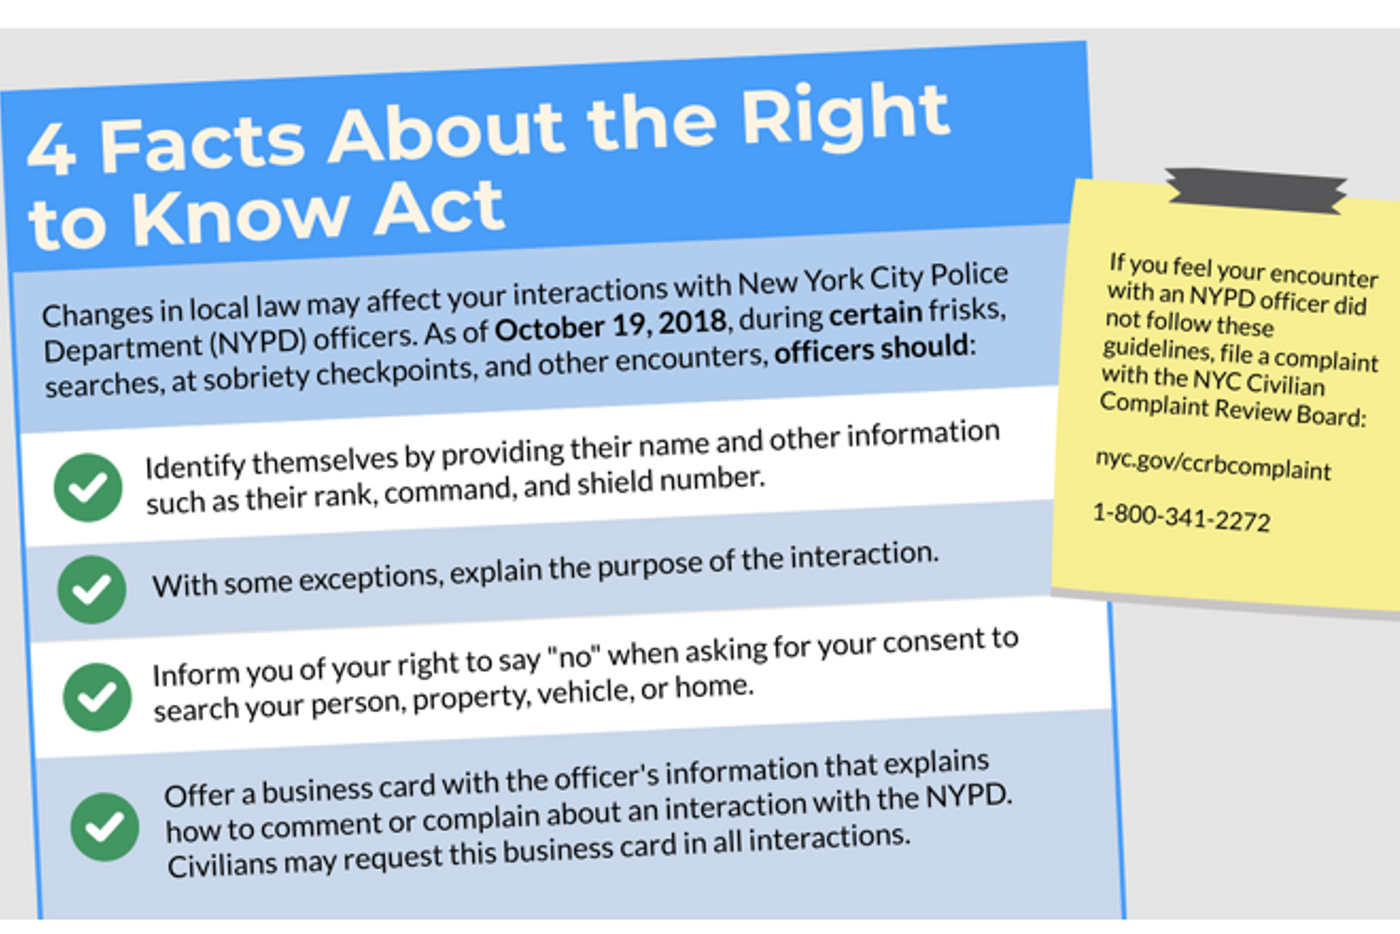 Information about the Right to Know Act, which went into effect in October